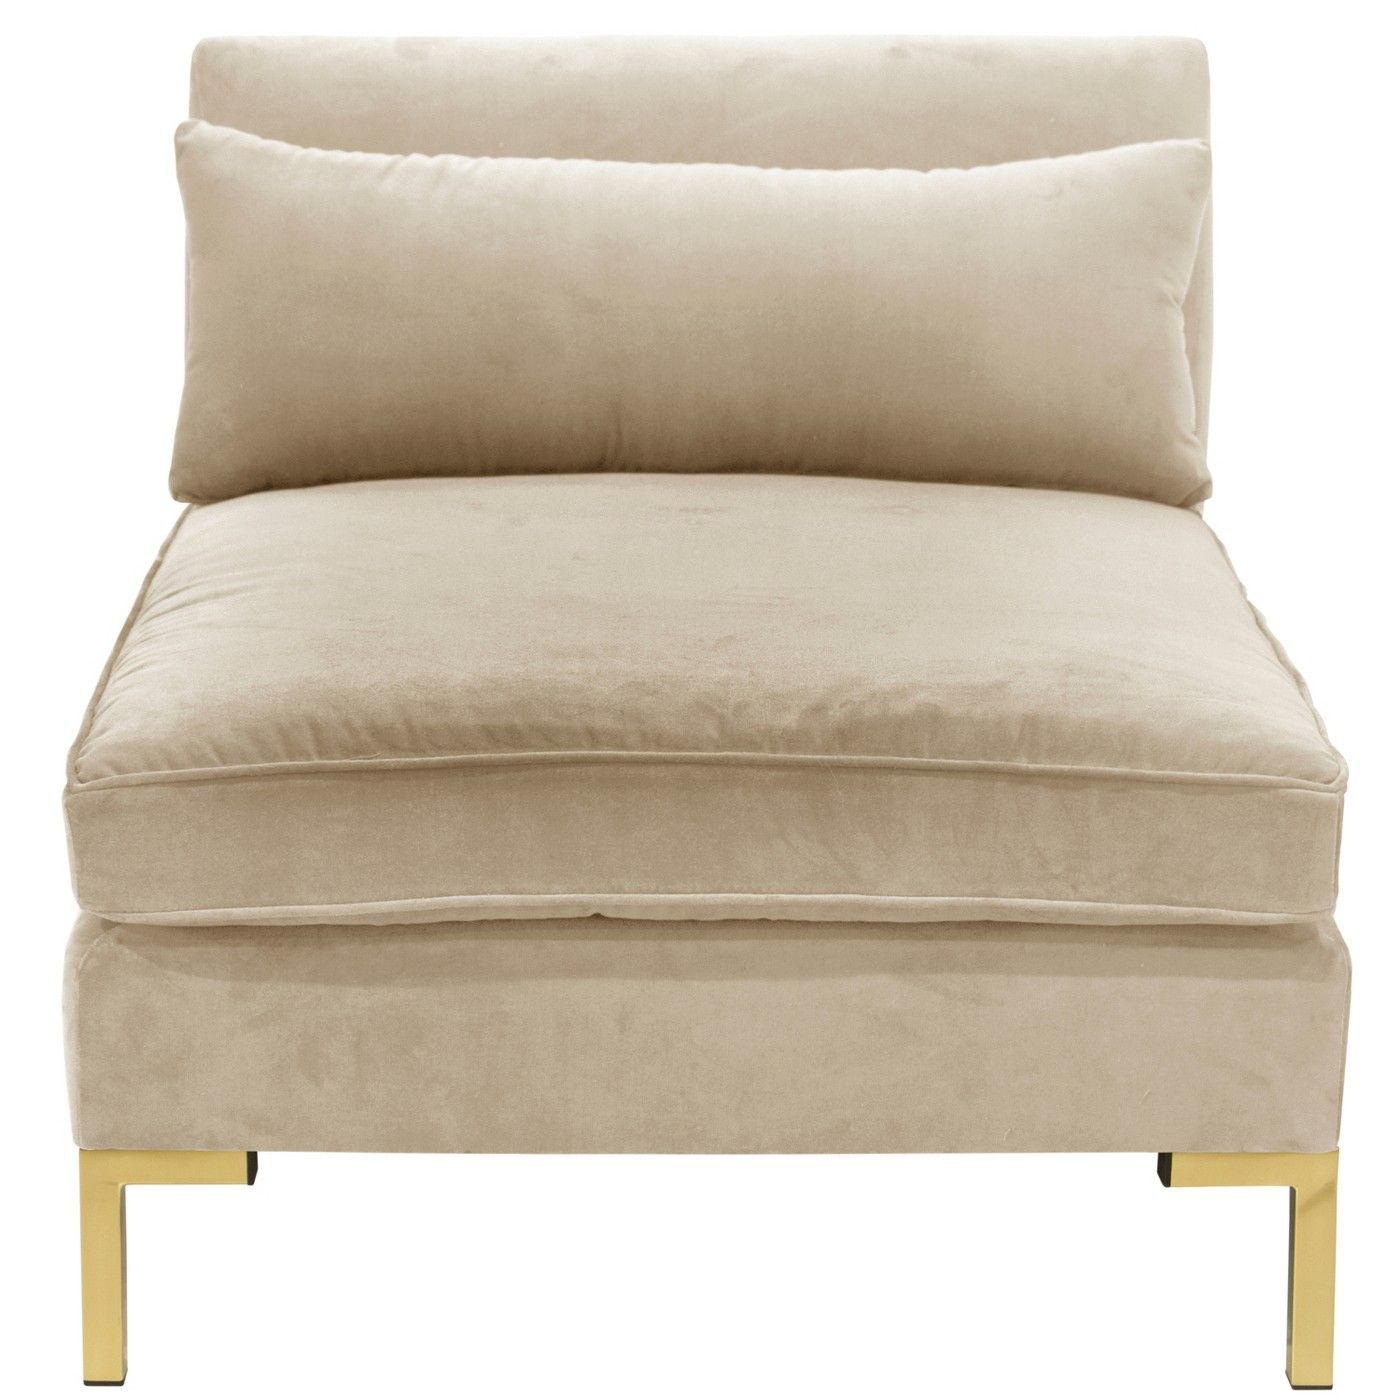 Alexis Armless Chair With Brass Metal Y Legs – Skyline With 4Pc Alexis Sectional Sofas With Silver Metal Y Legs (View 13 of 15)